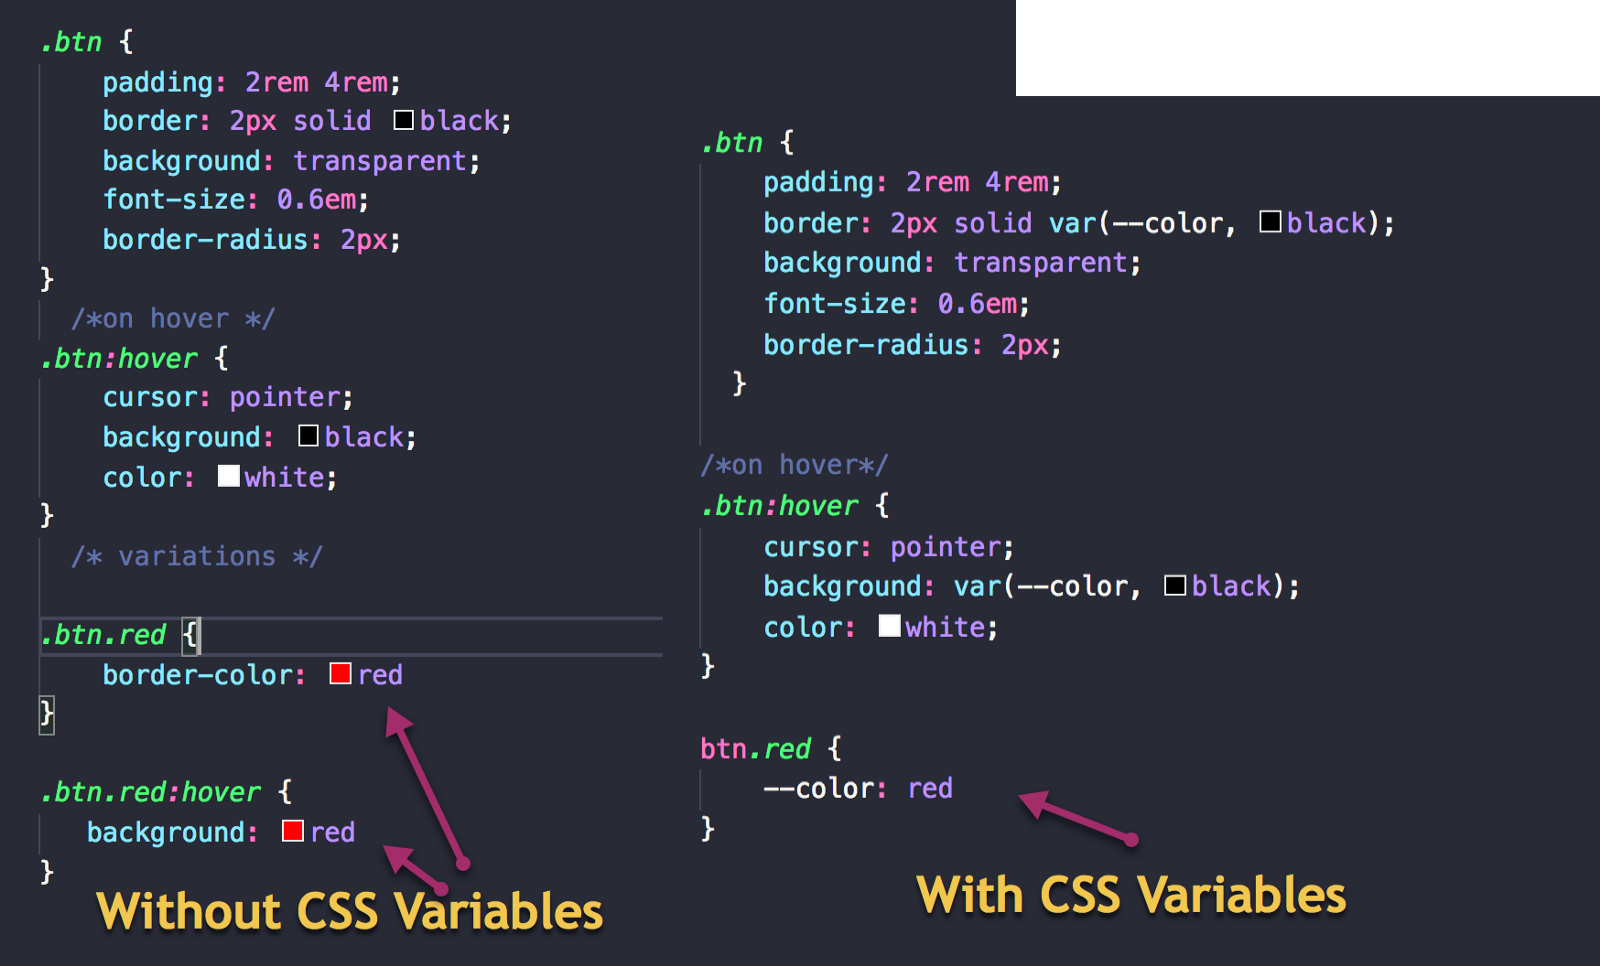 Without CSS Variables VS with CSS Variables